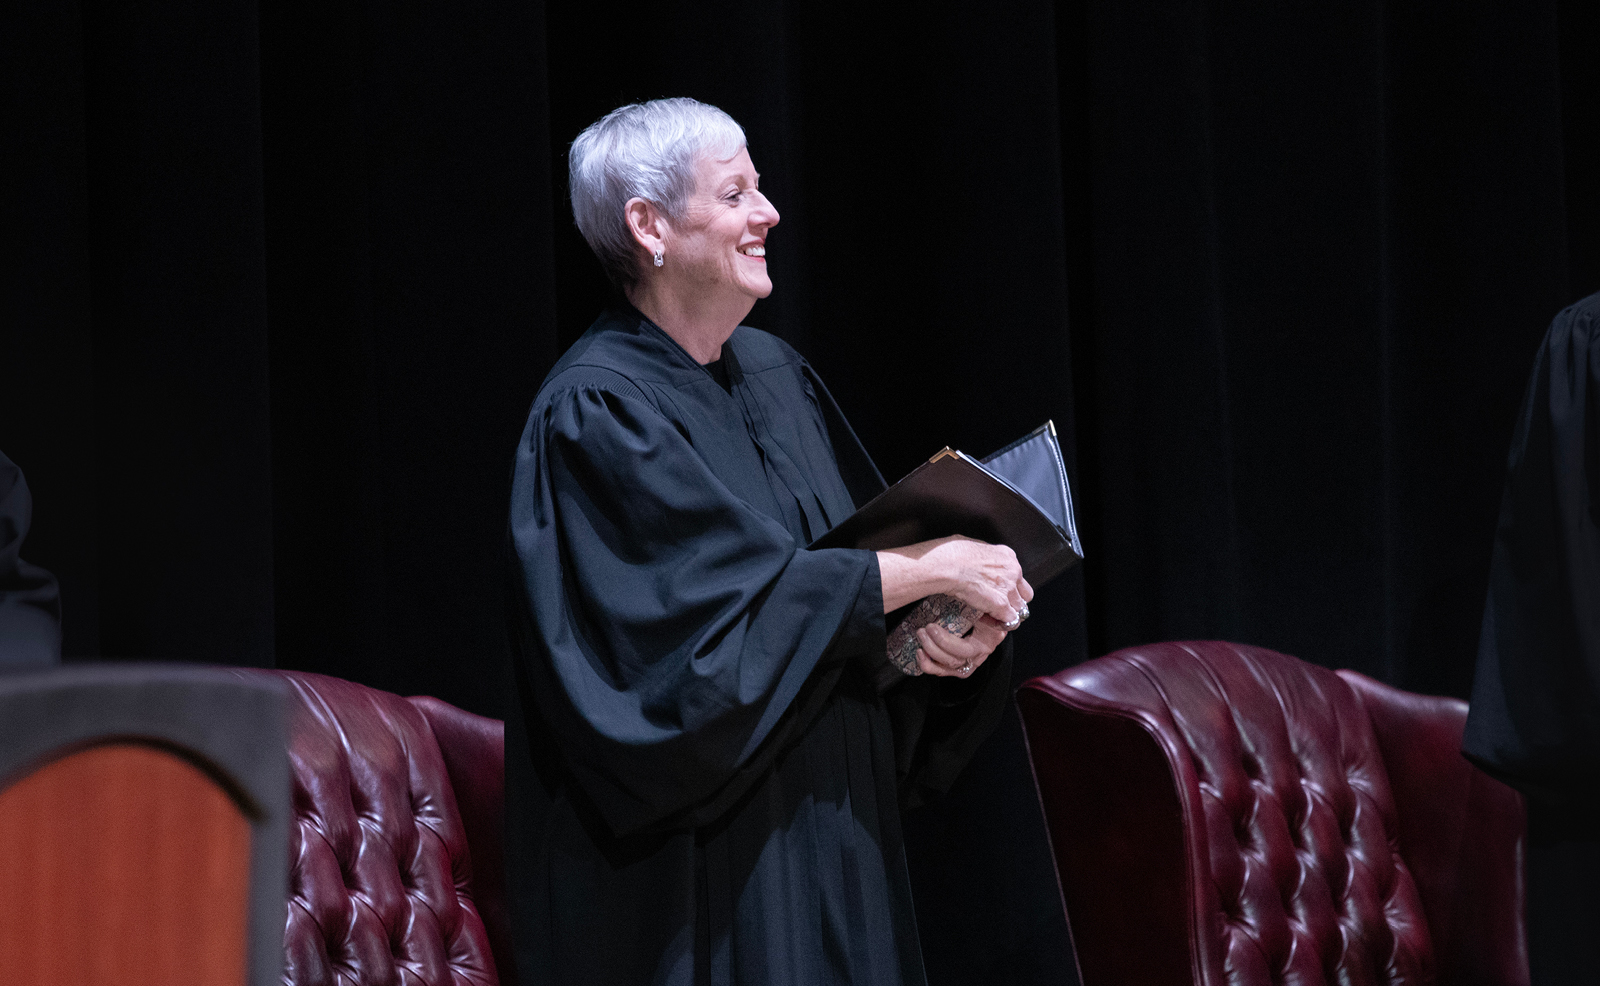 Image of a female justice wearing her black judicial robe smiling